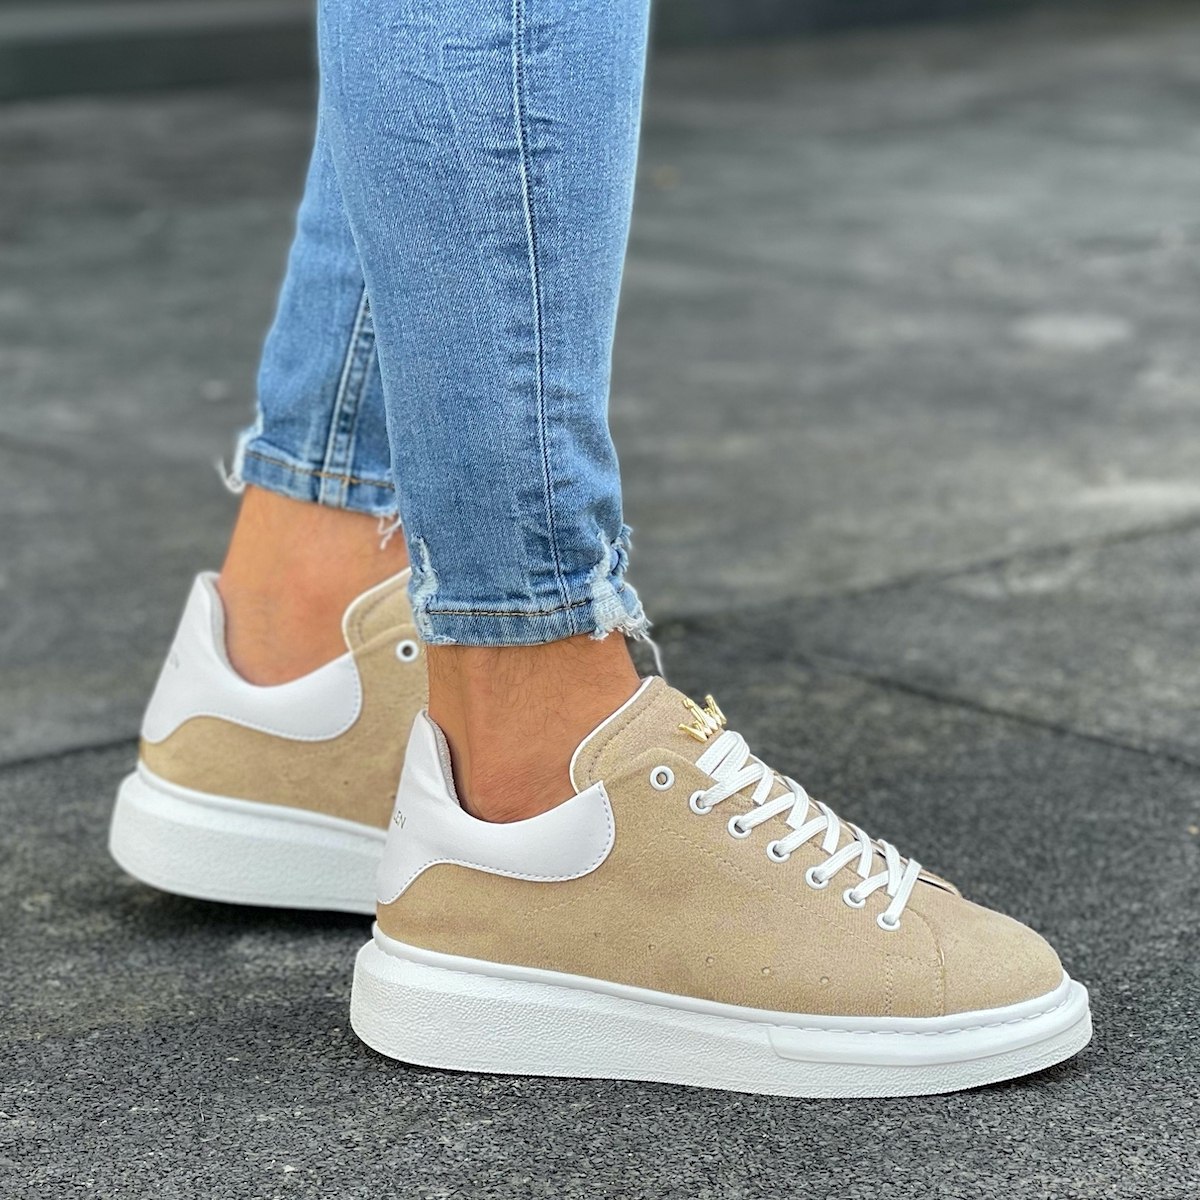 Chunky Sneakers Shoes Beige | Martin Valen